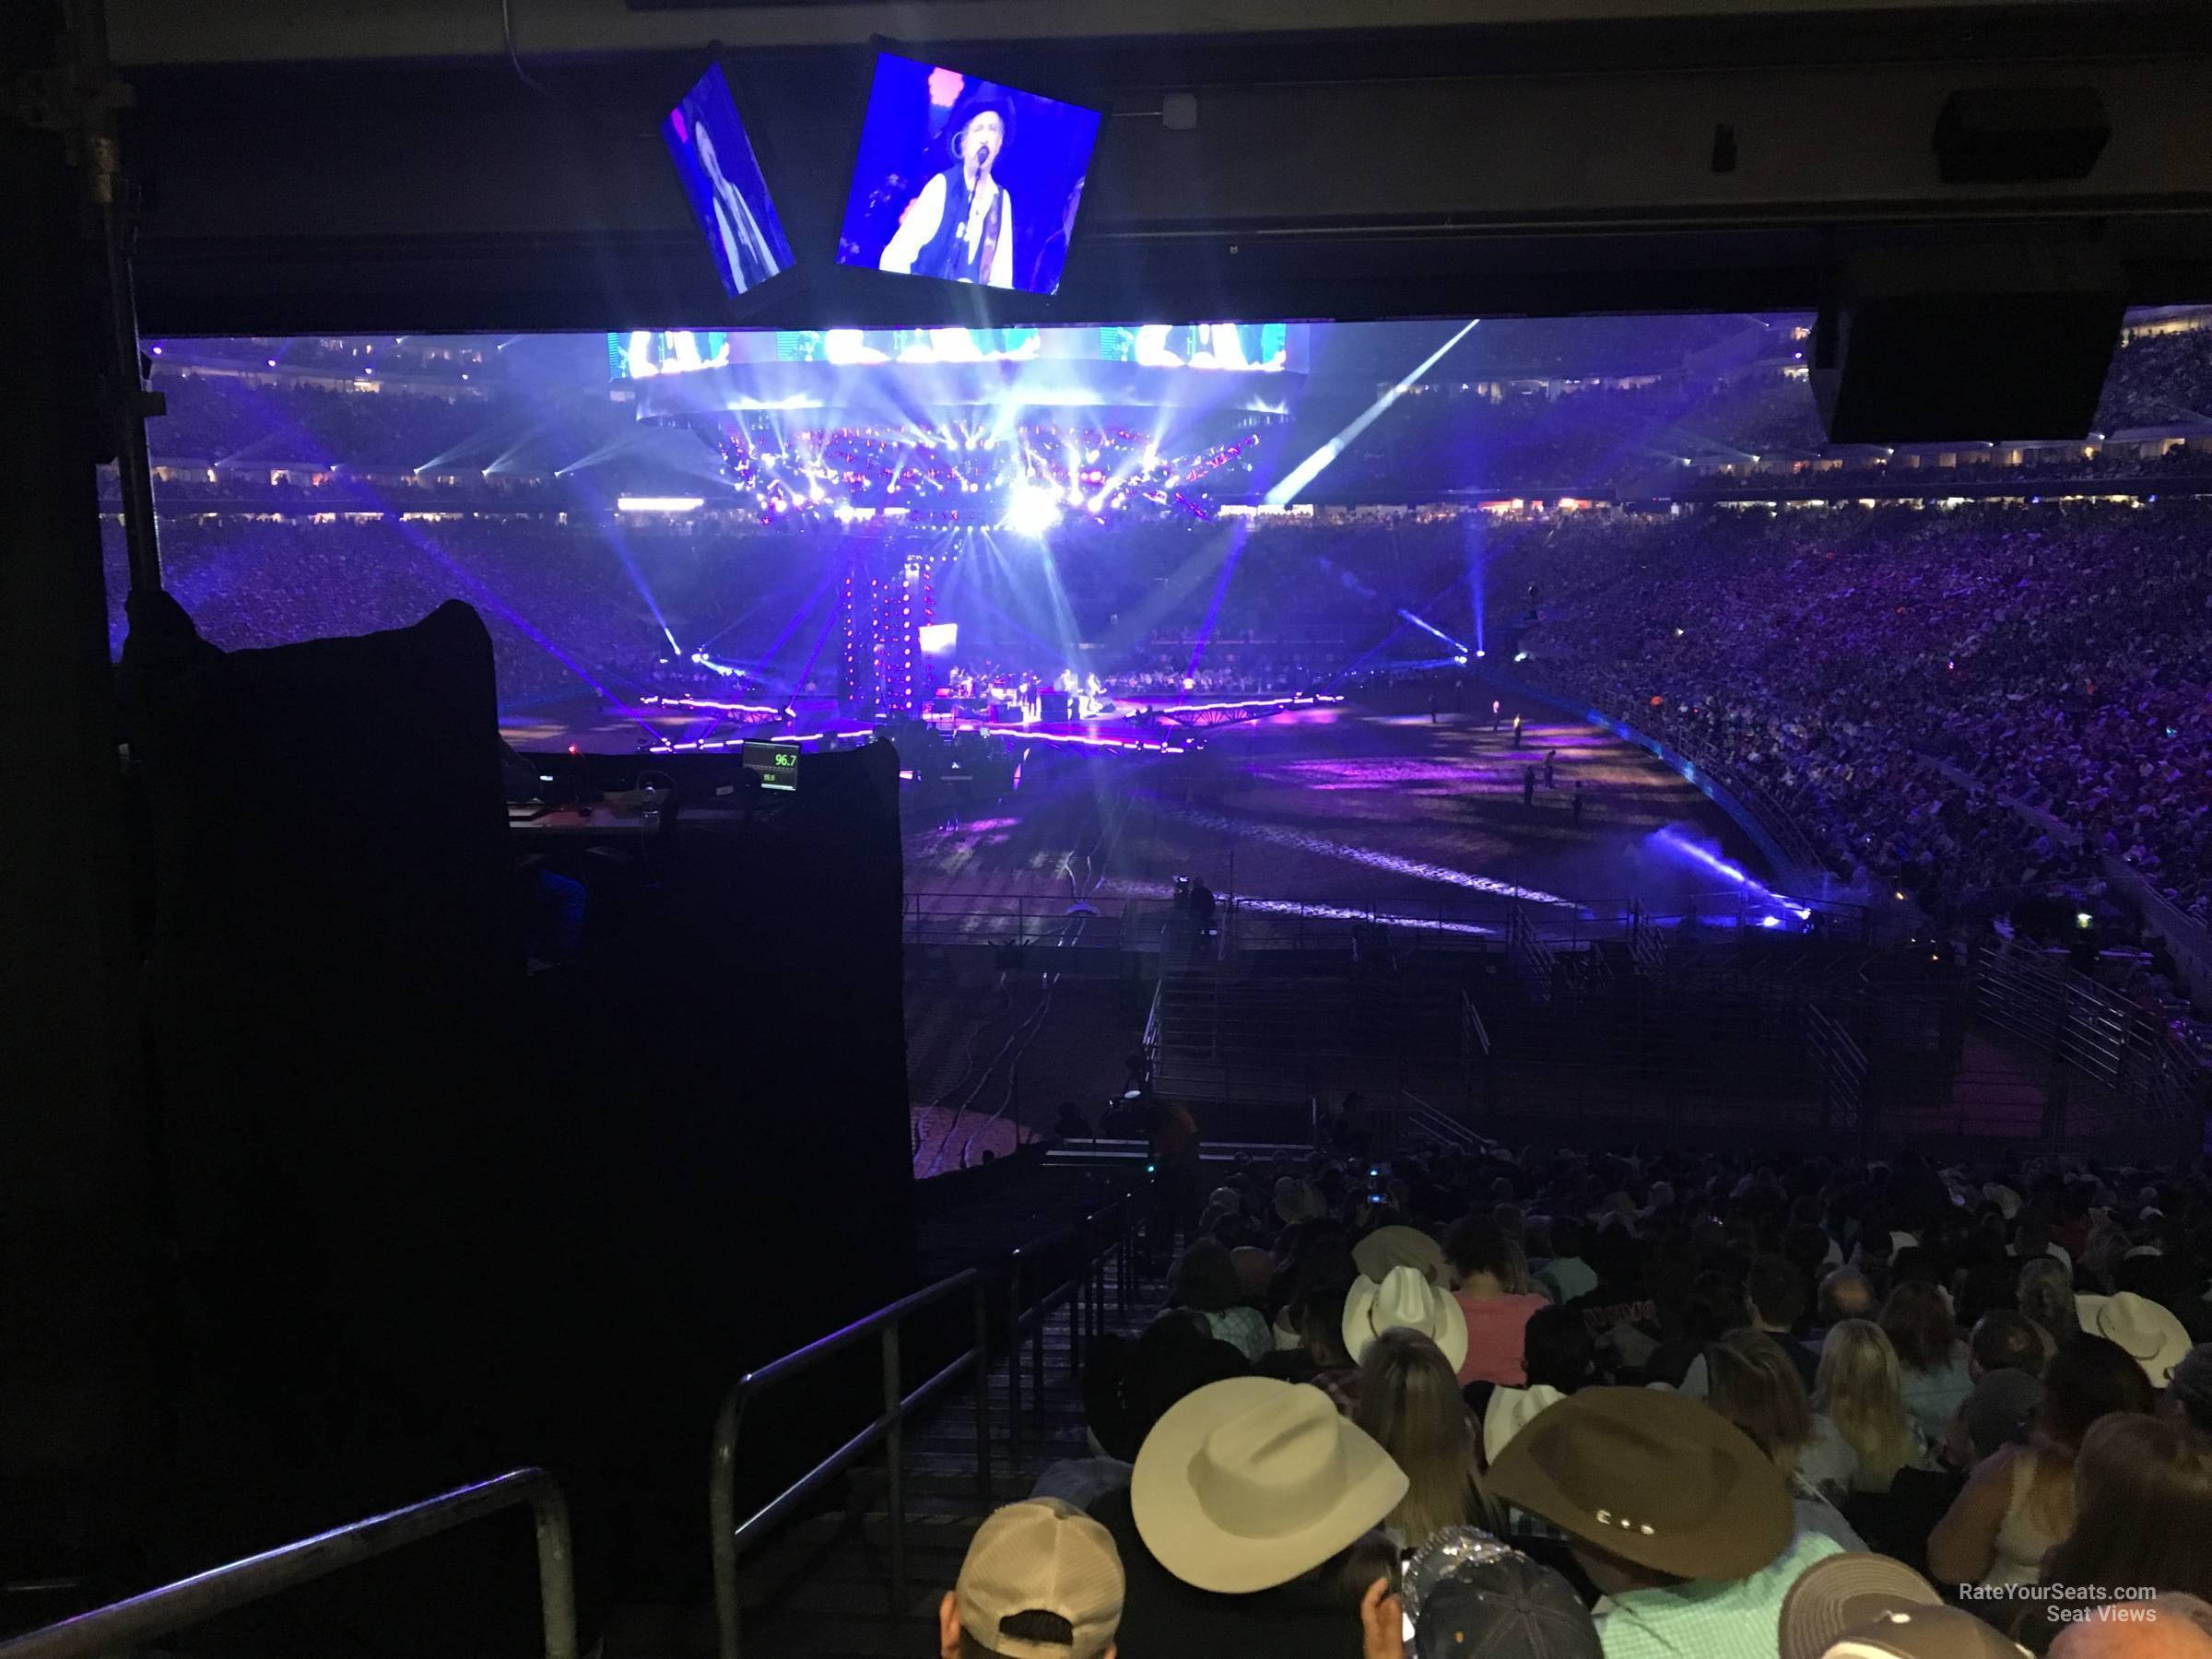 section 136, row hh seat view  for concert - nrg stadium